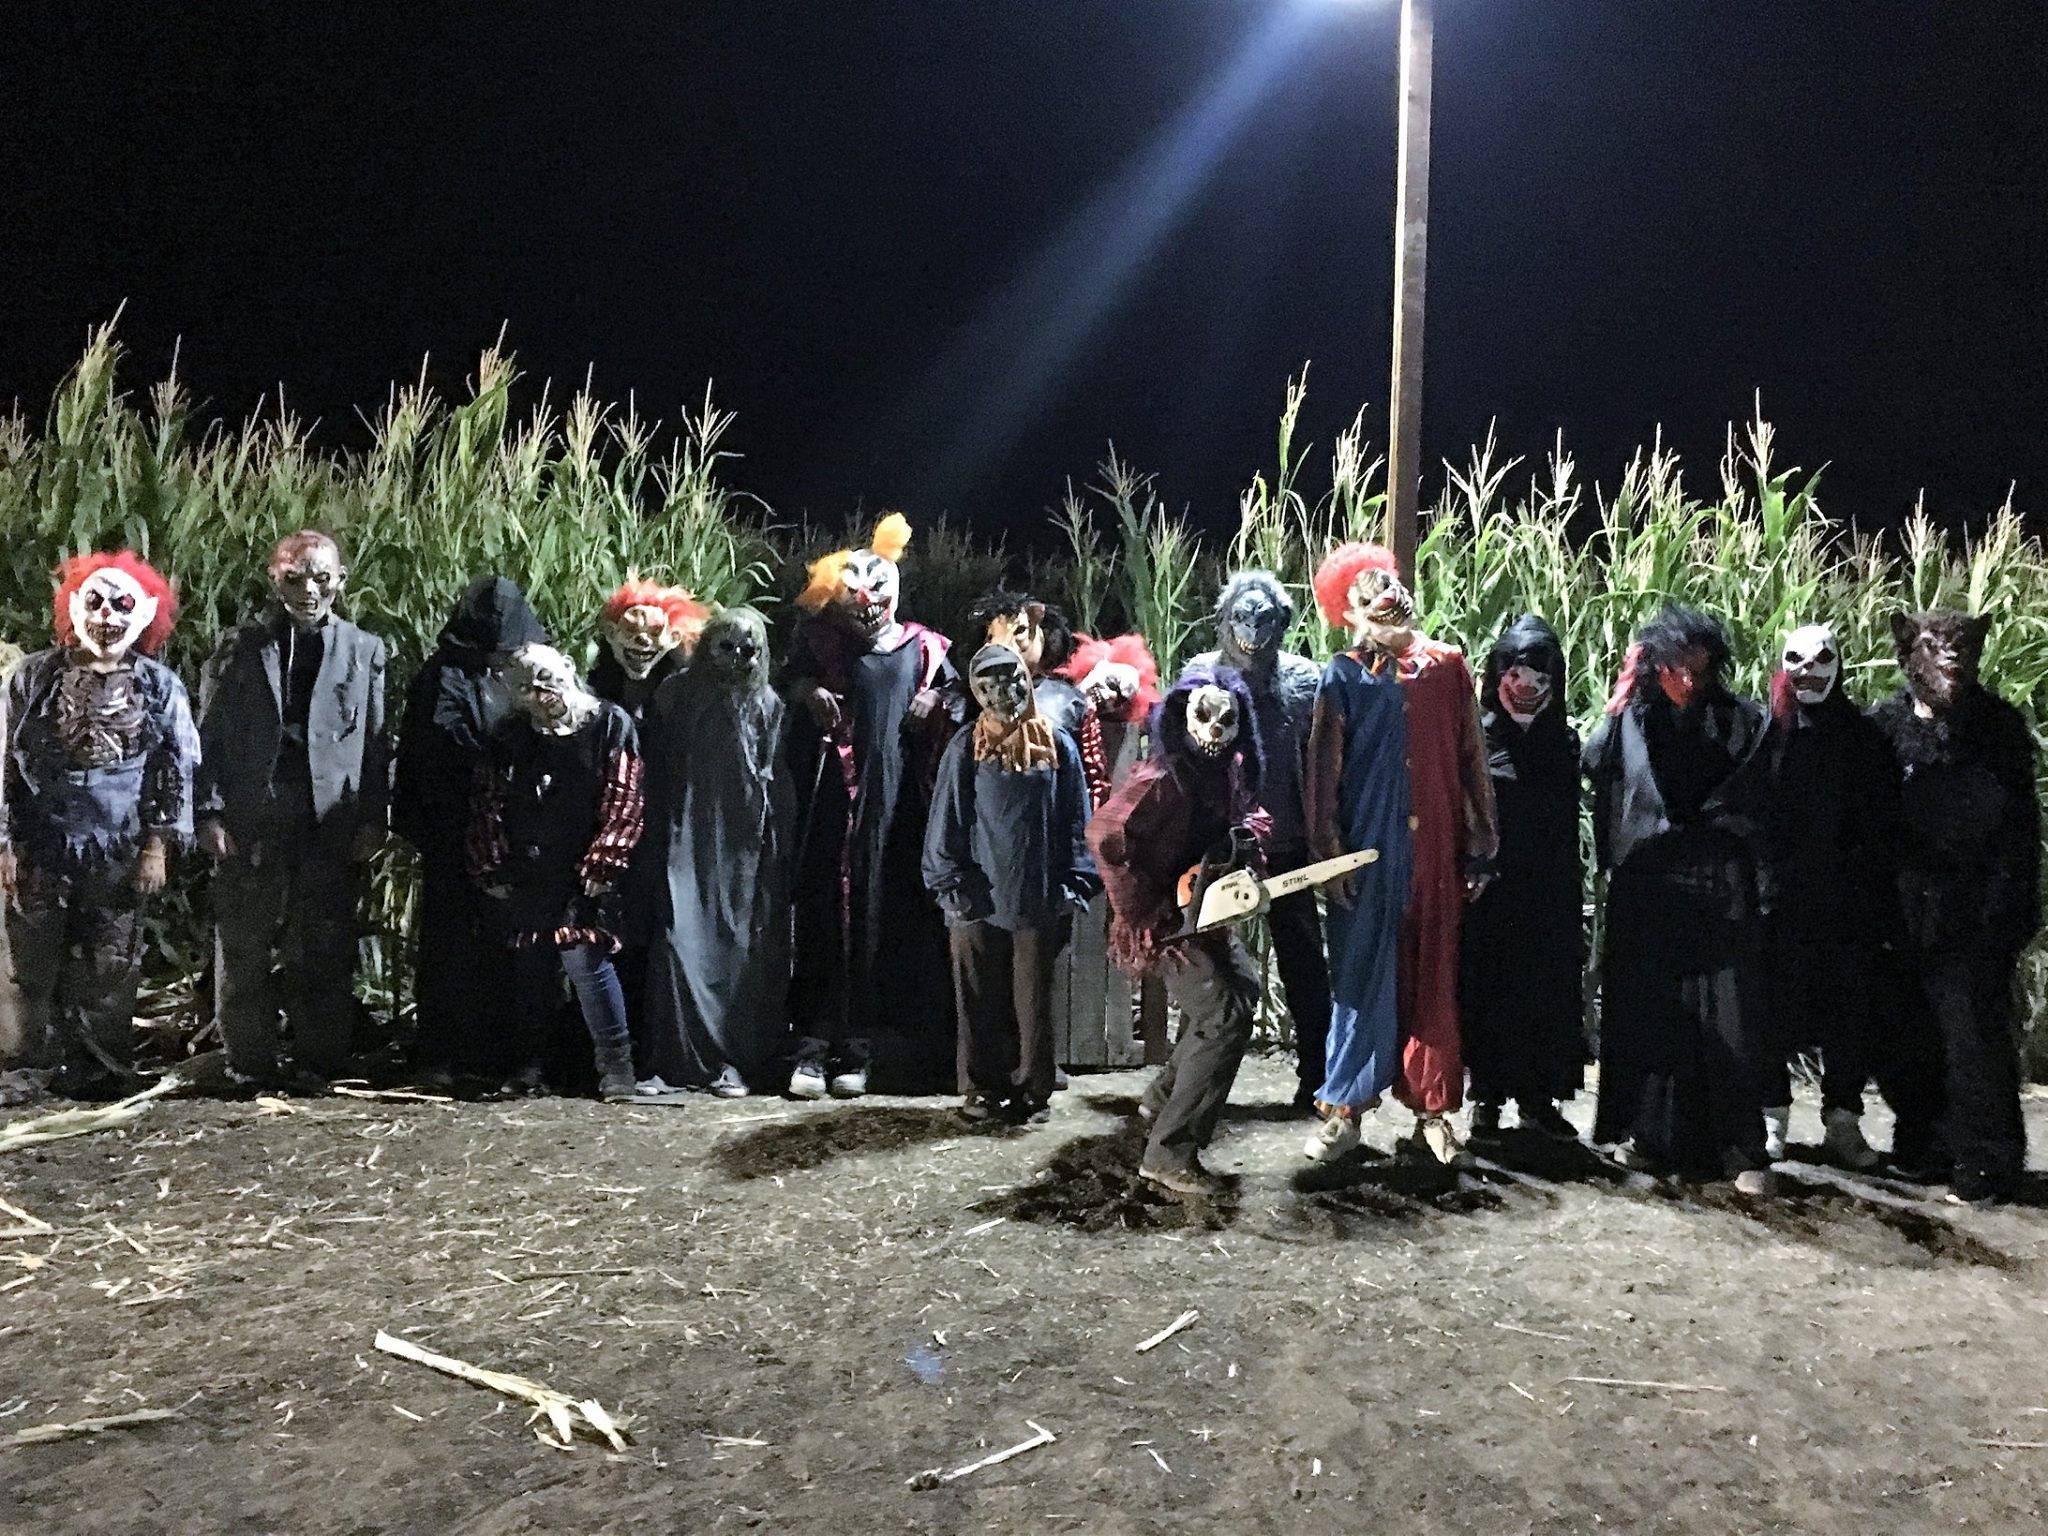 People dressed up in scary costumes at a corn maze at night